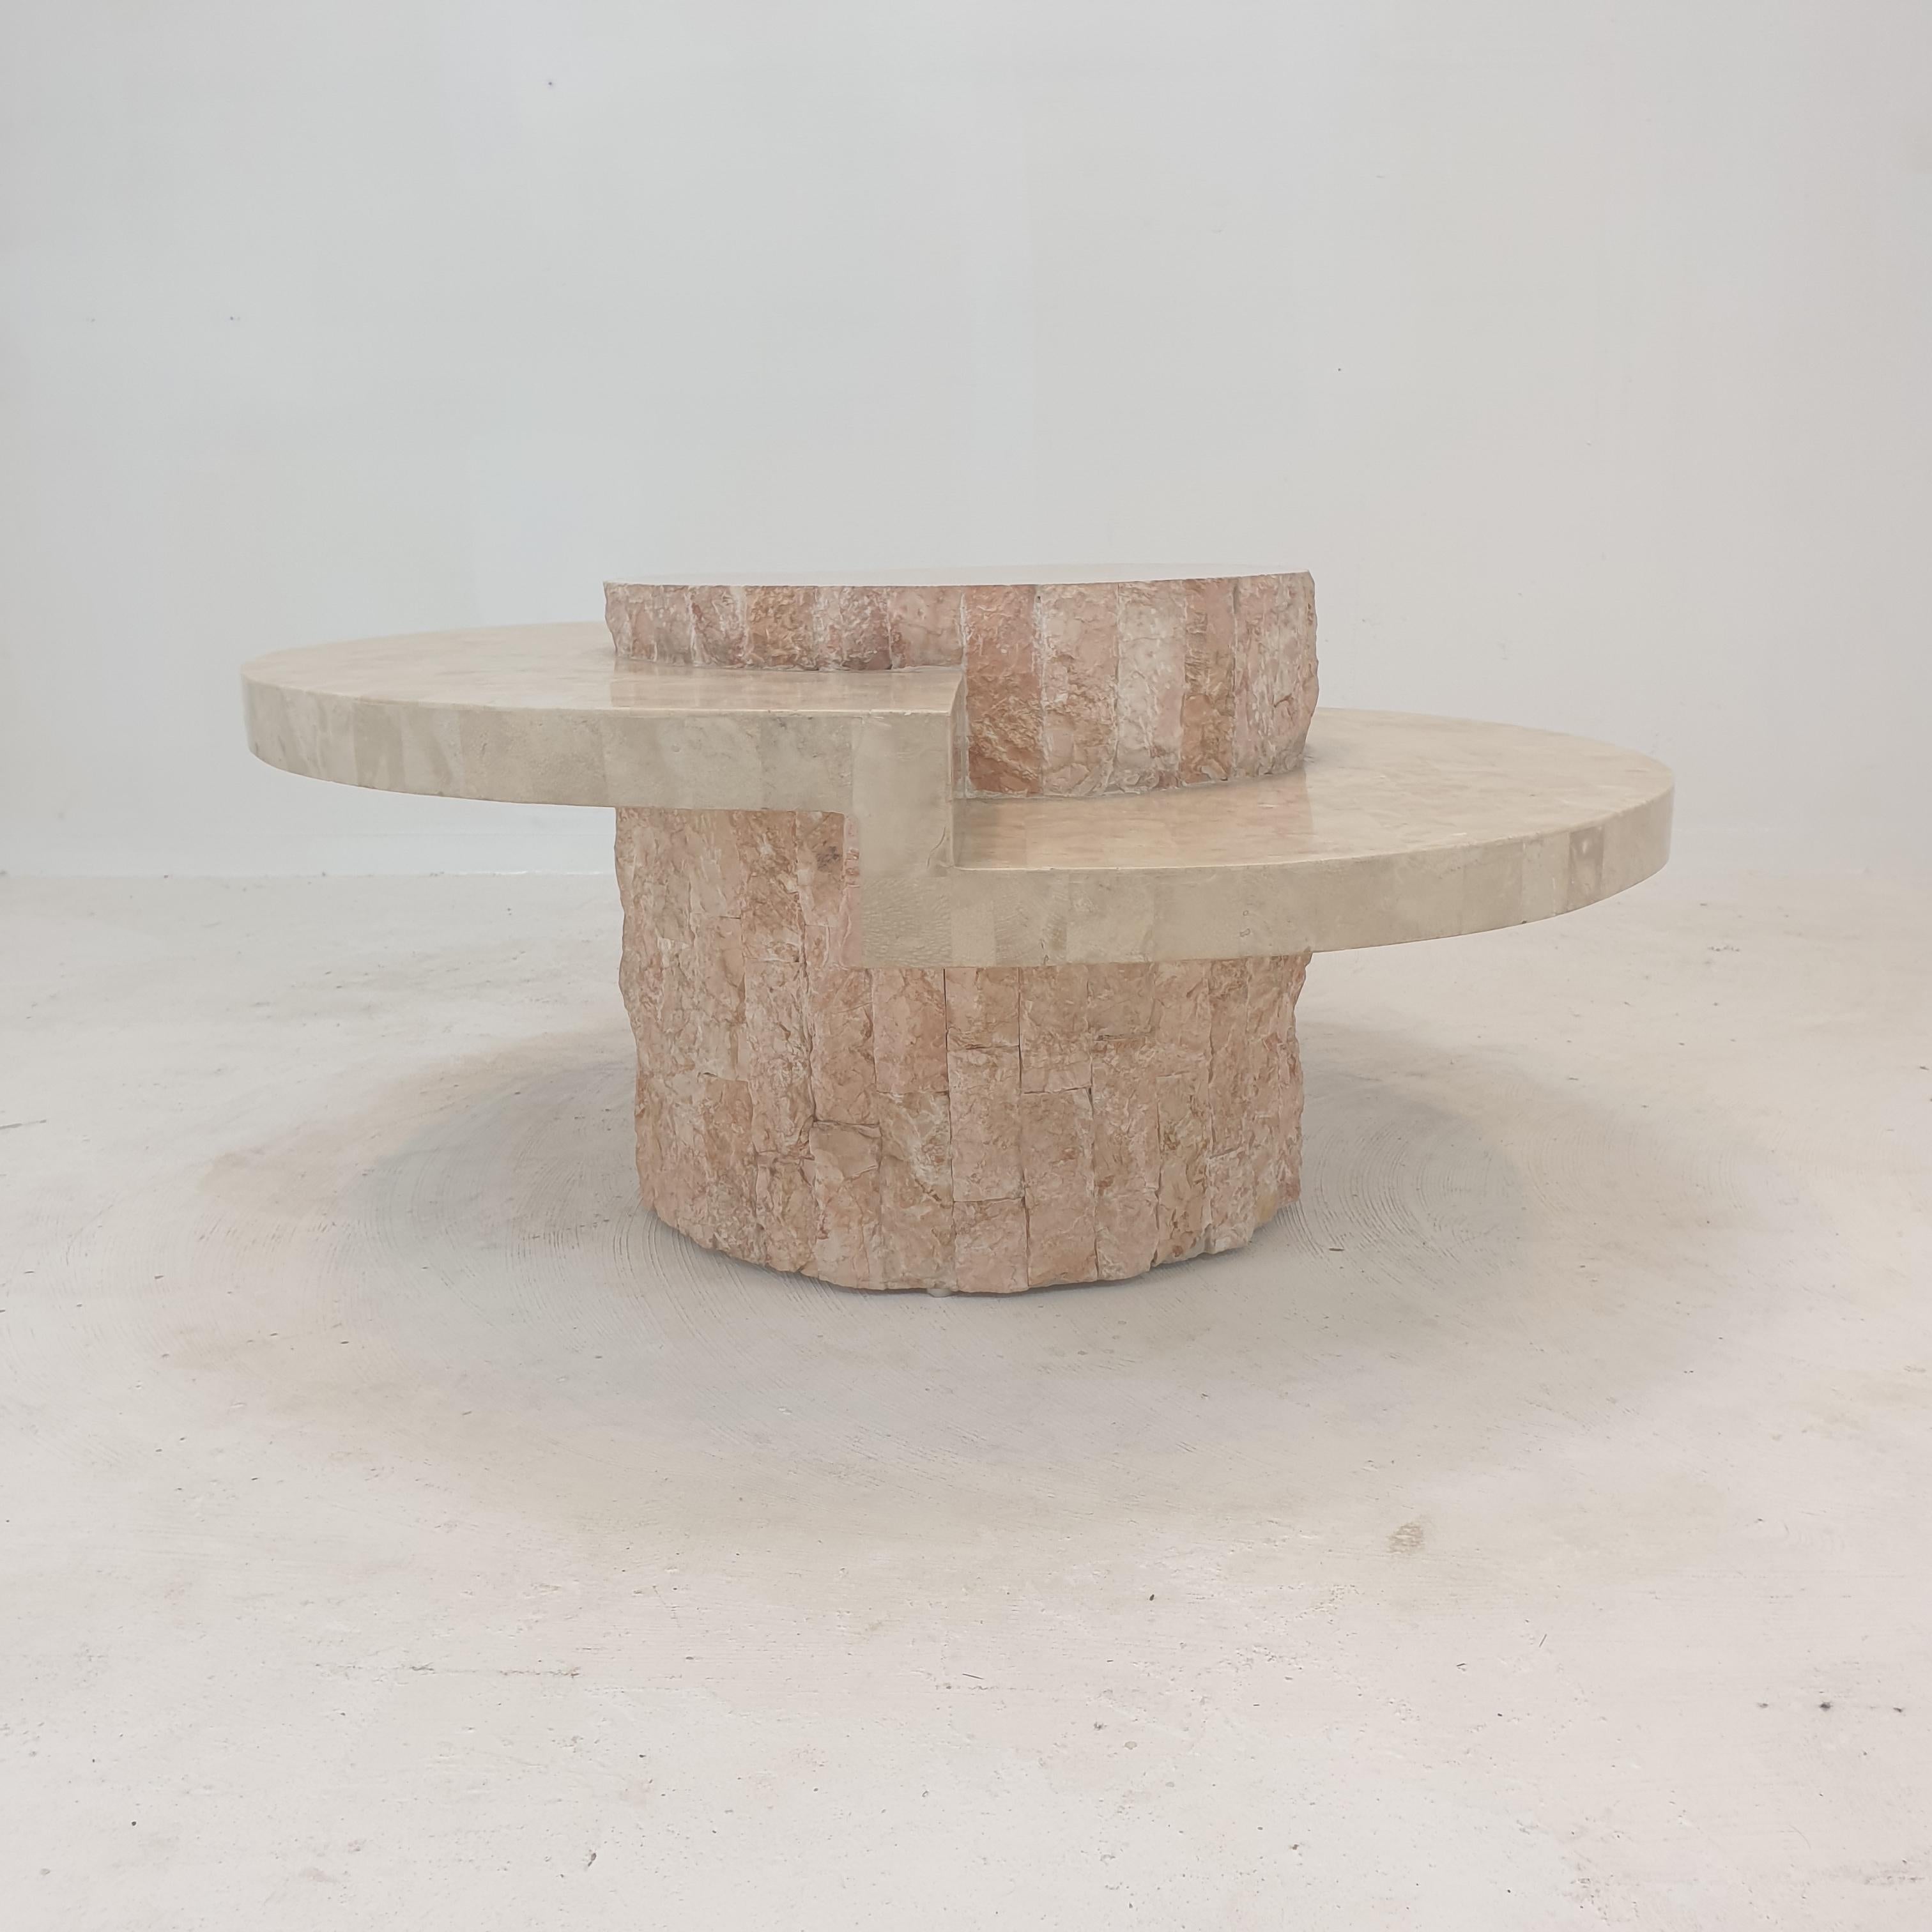 Post-Modern Magnussen Ponte Mactan Stone or Fossil Stone Coffee Table, 1980s For Sale